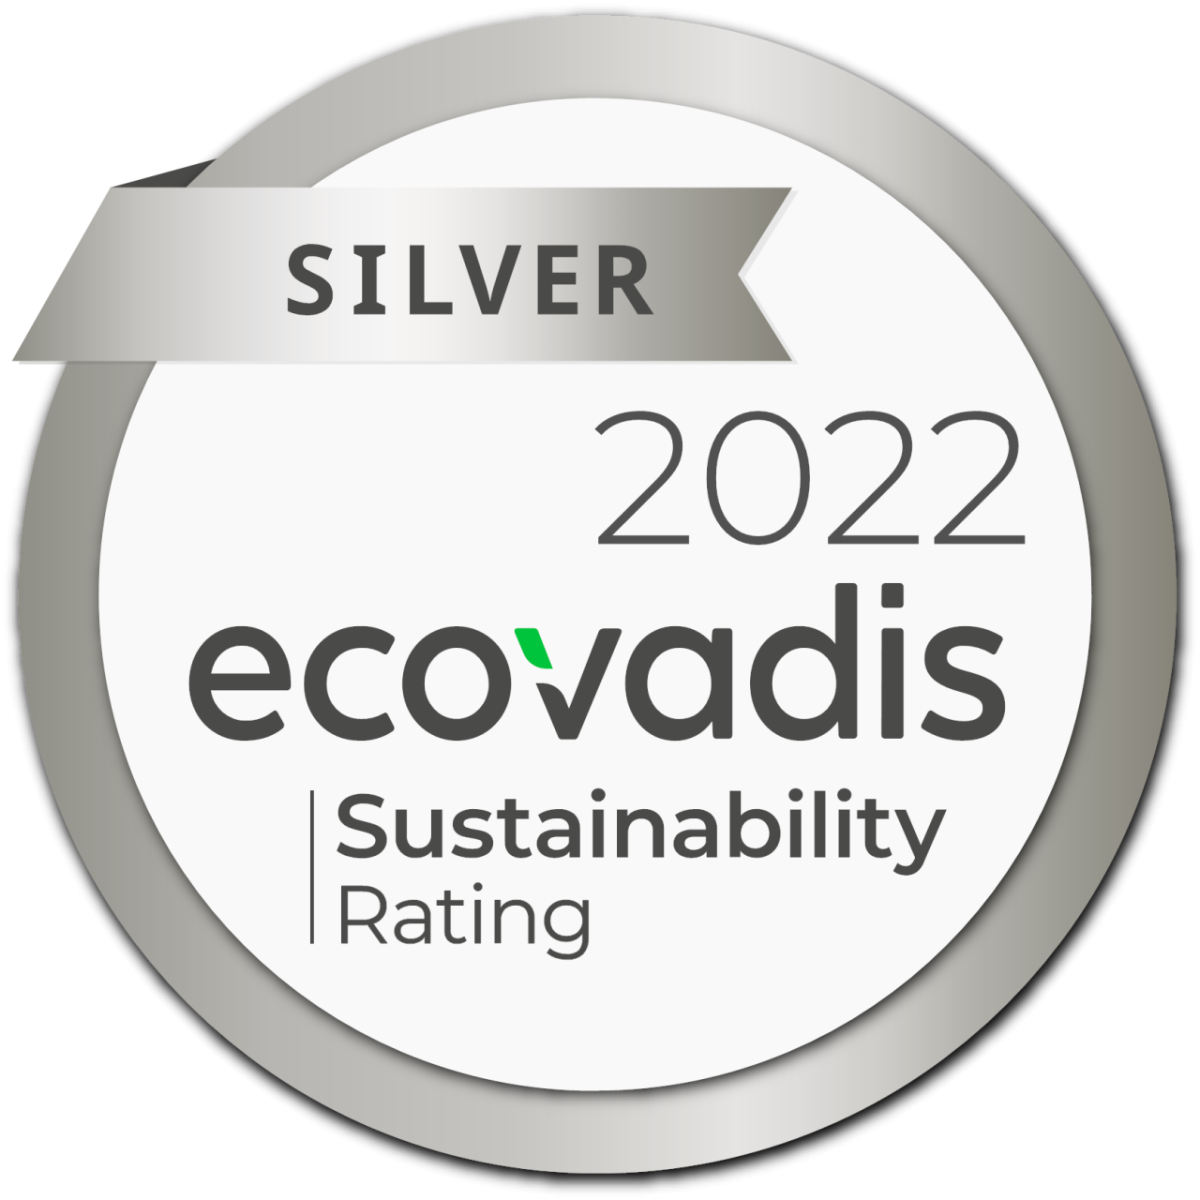 "Silver 2022 ecovadis Sustainability Rating"